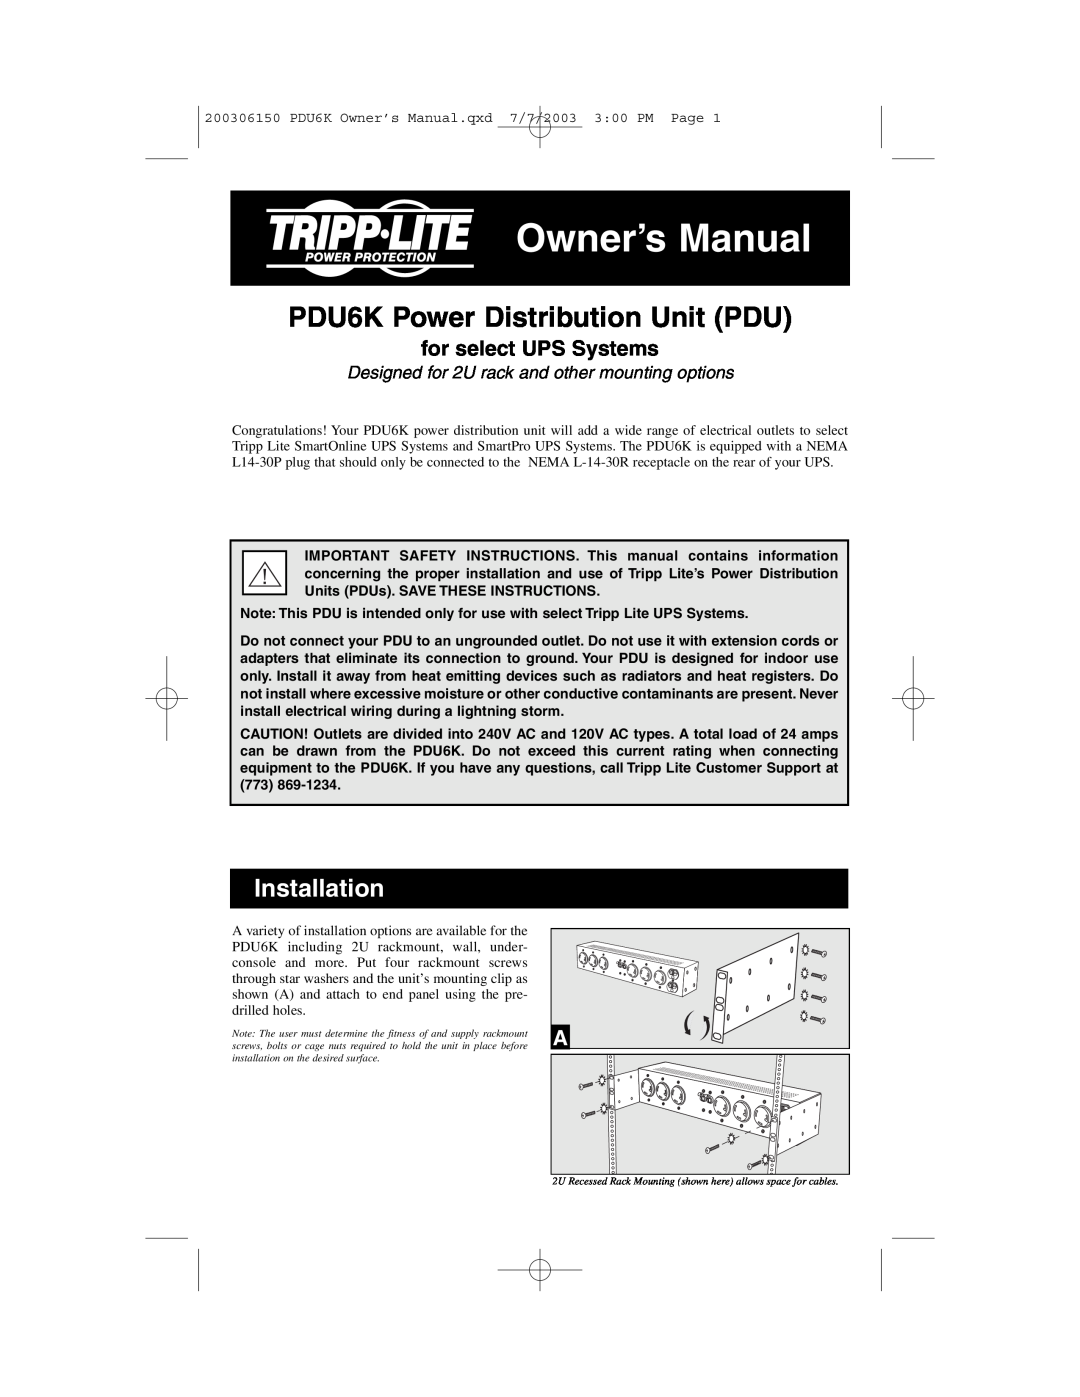 Tripp Lite owner manual Installation, PDU6K Power Distribution Unit PDU, for select UPS Systems 